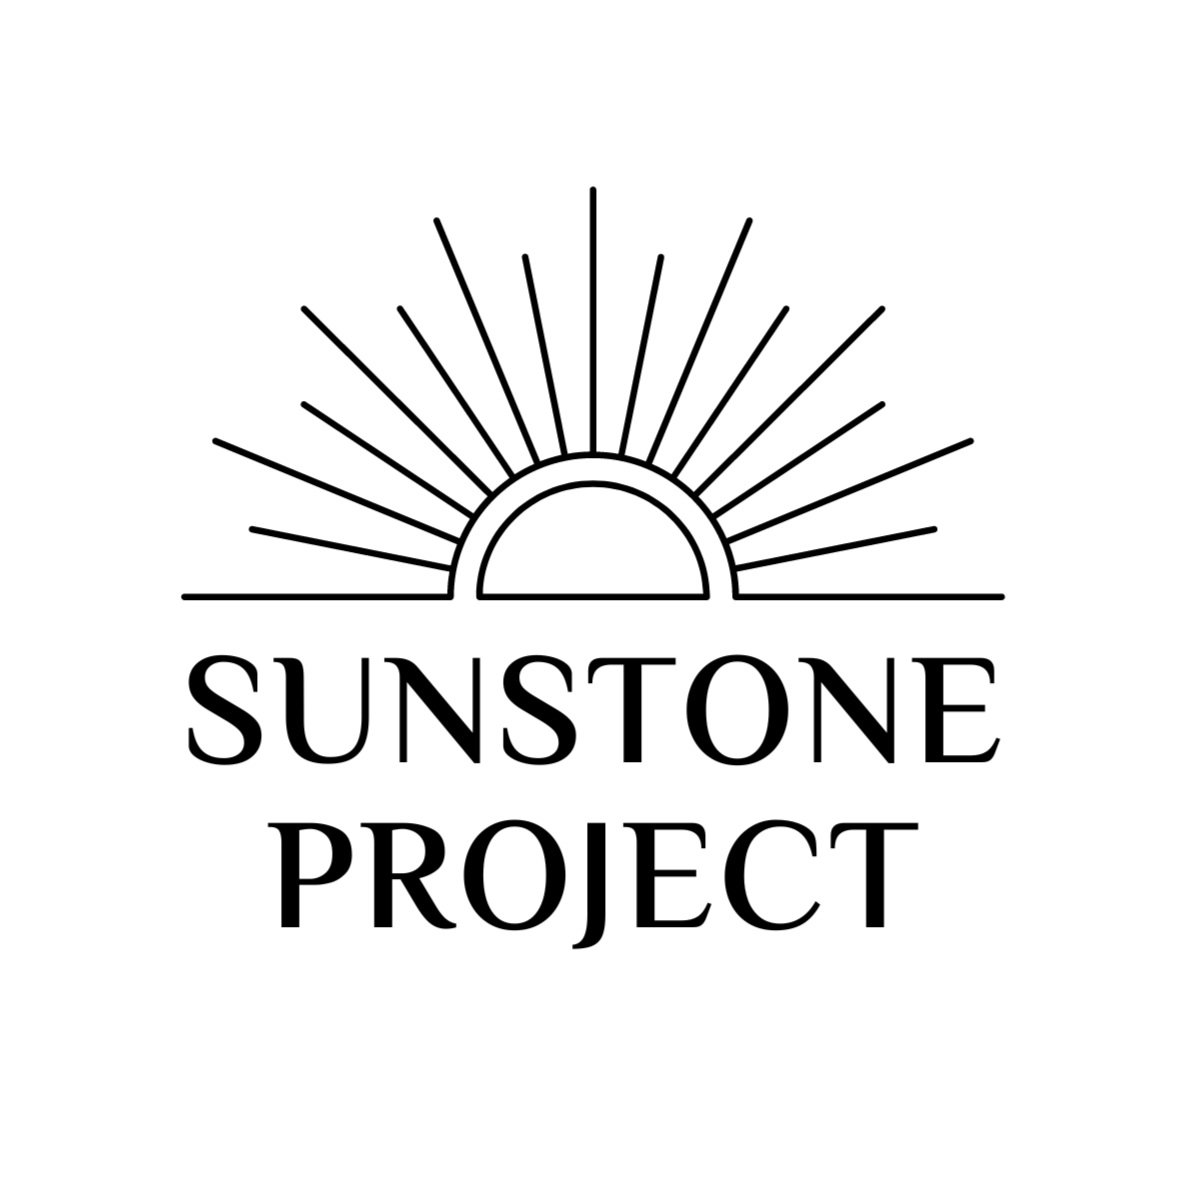 Our Mission — The Sunstone Project